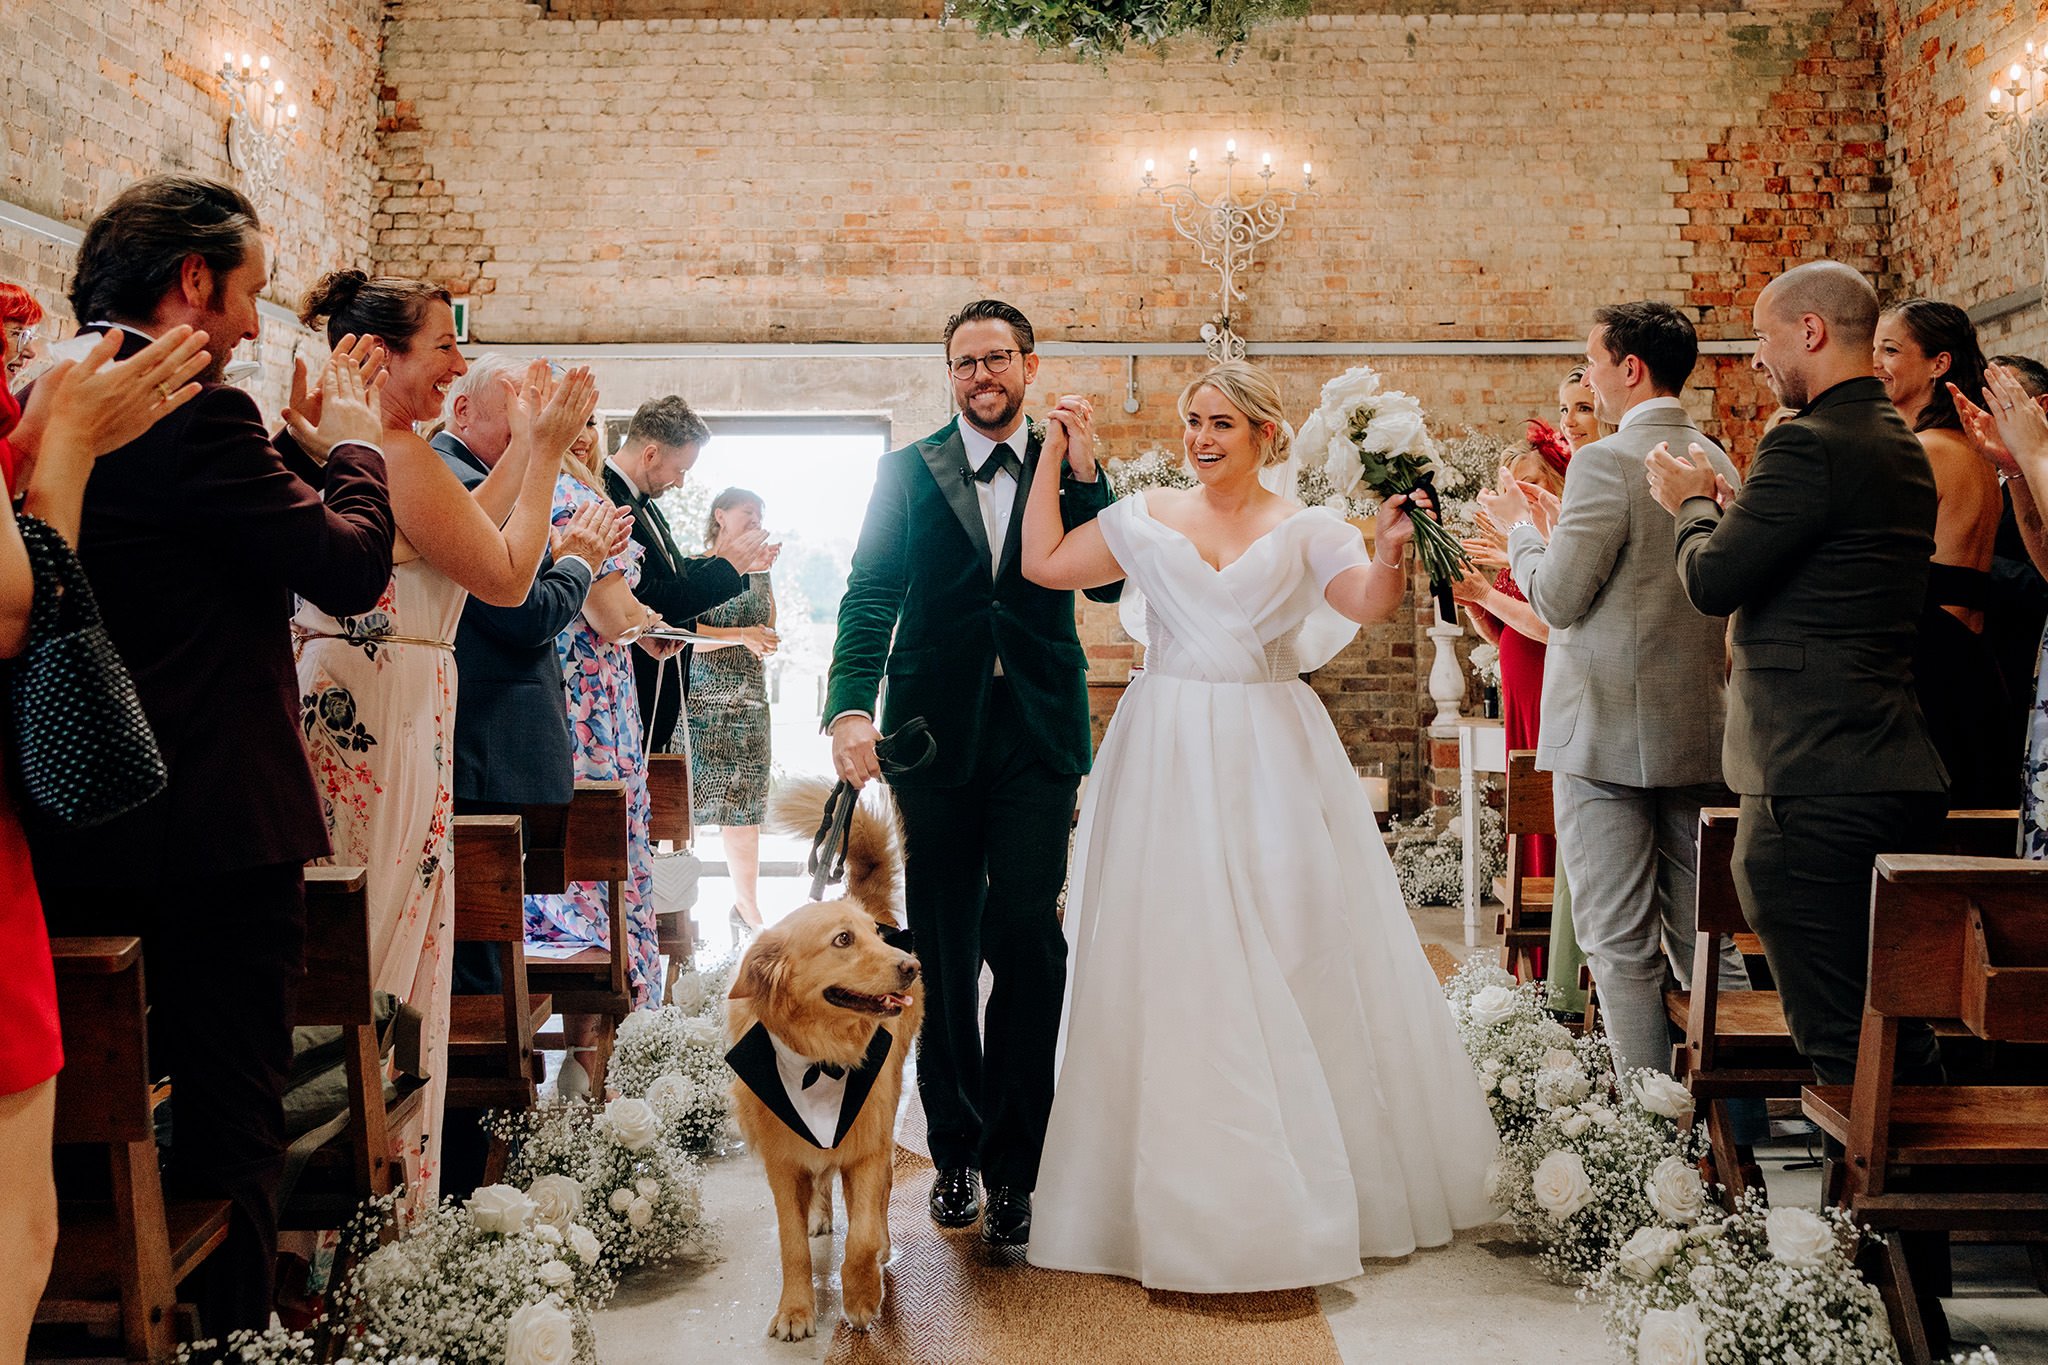 Bride and groom walking up the aisle with their dog